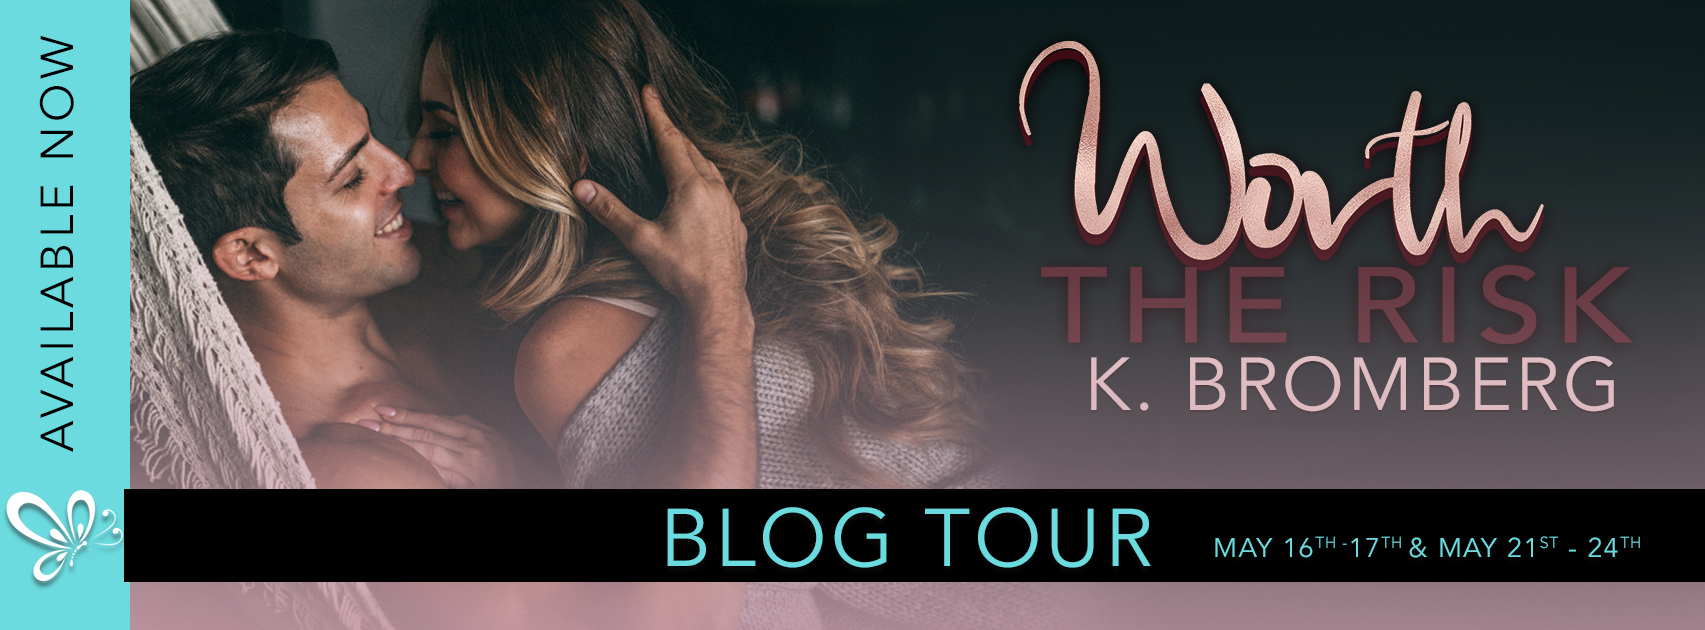 The moms review Worth the Risk by K. Bromberg! And a giveaway too!